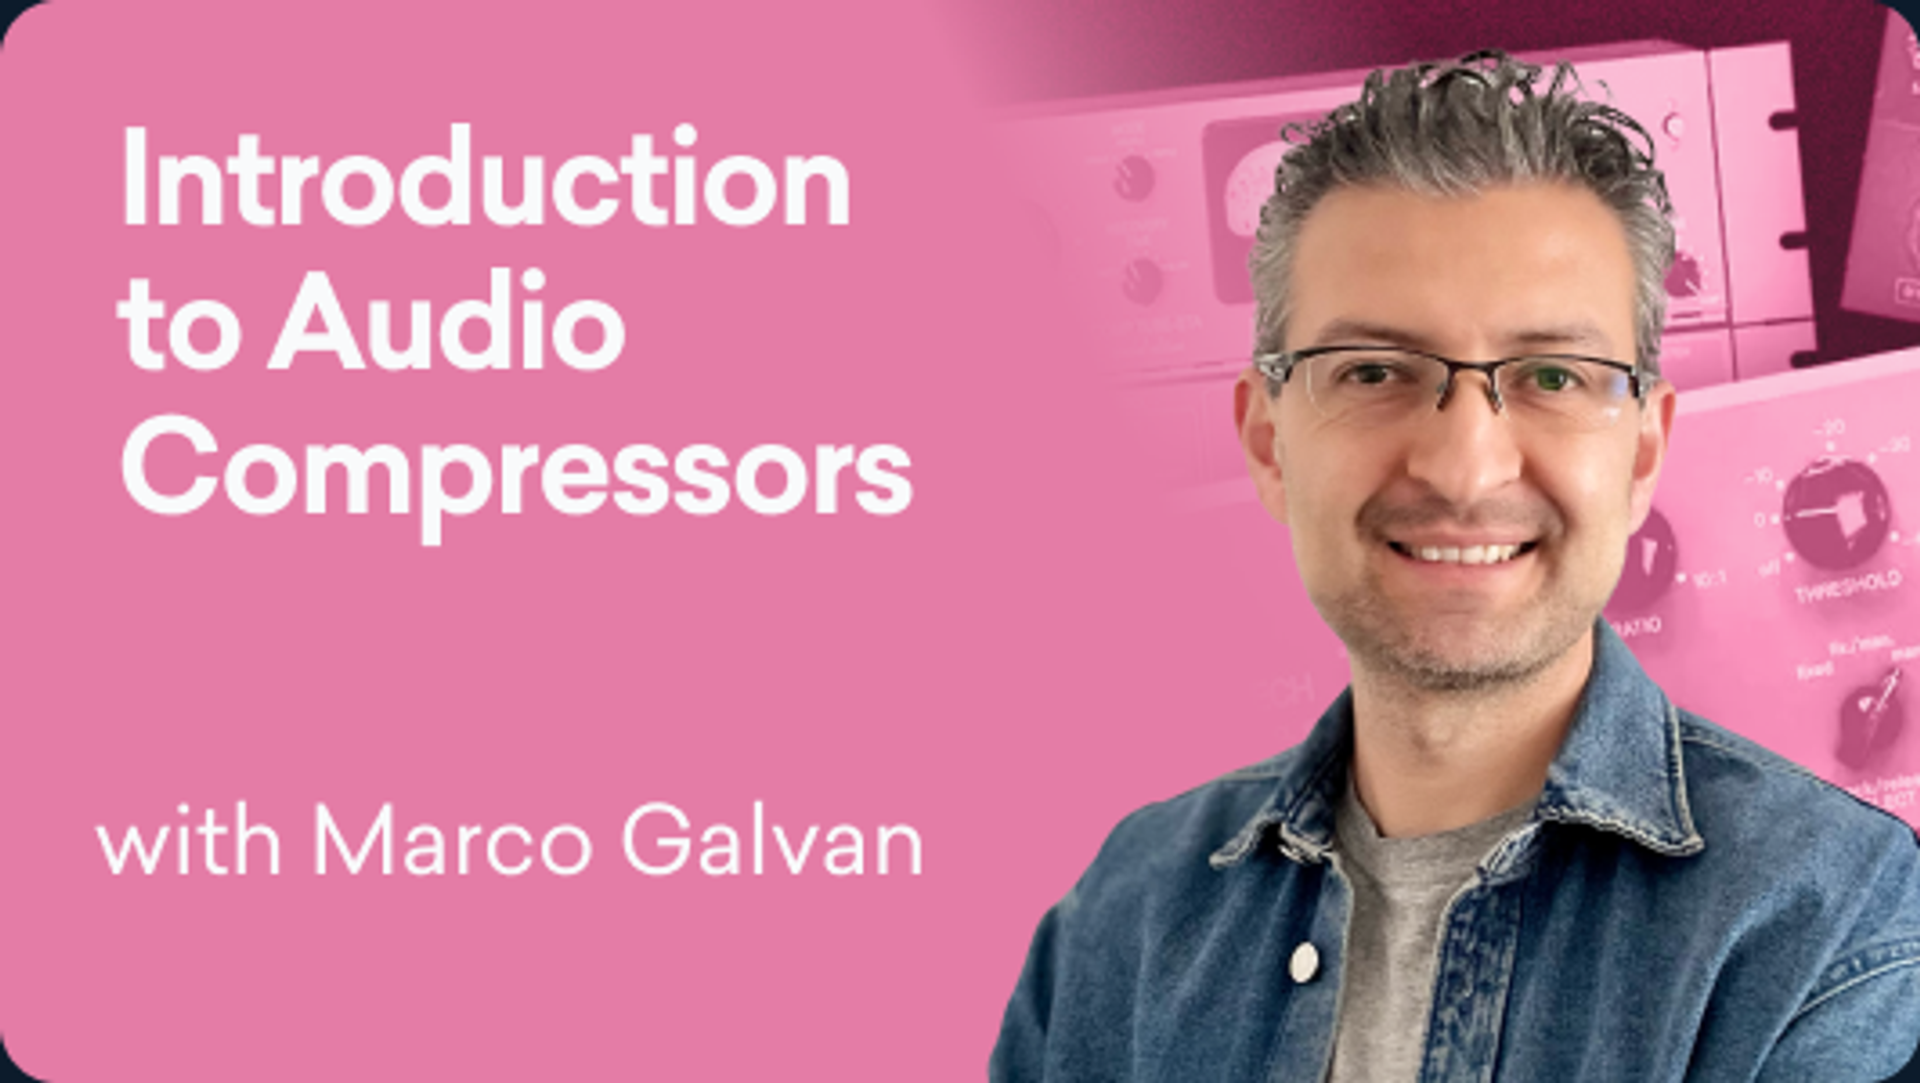 Introduction to Audio Compressors